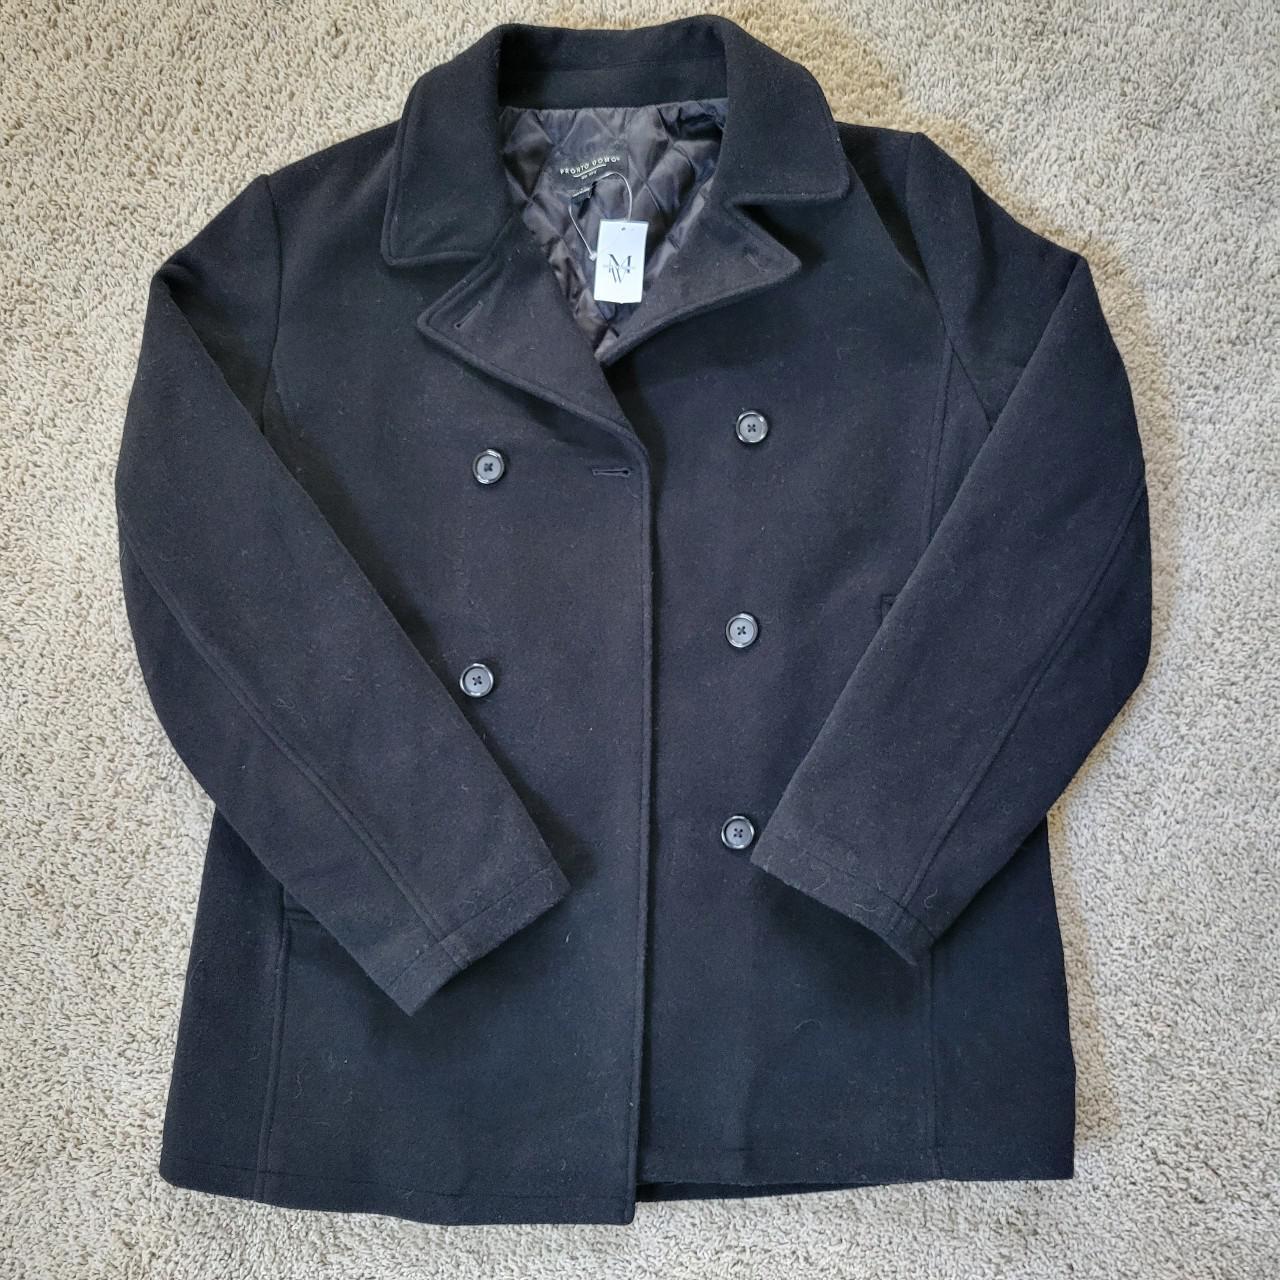 NWT Modern Fit Double-Breasted Peacoat Men's staple... - Depop